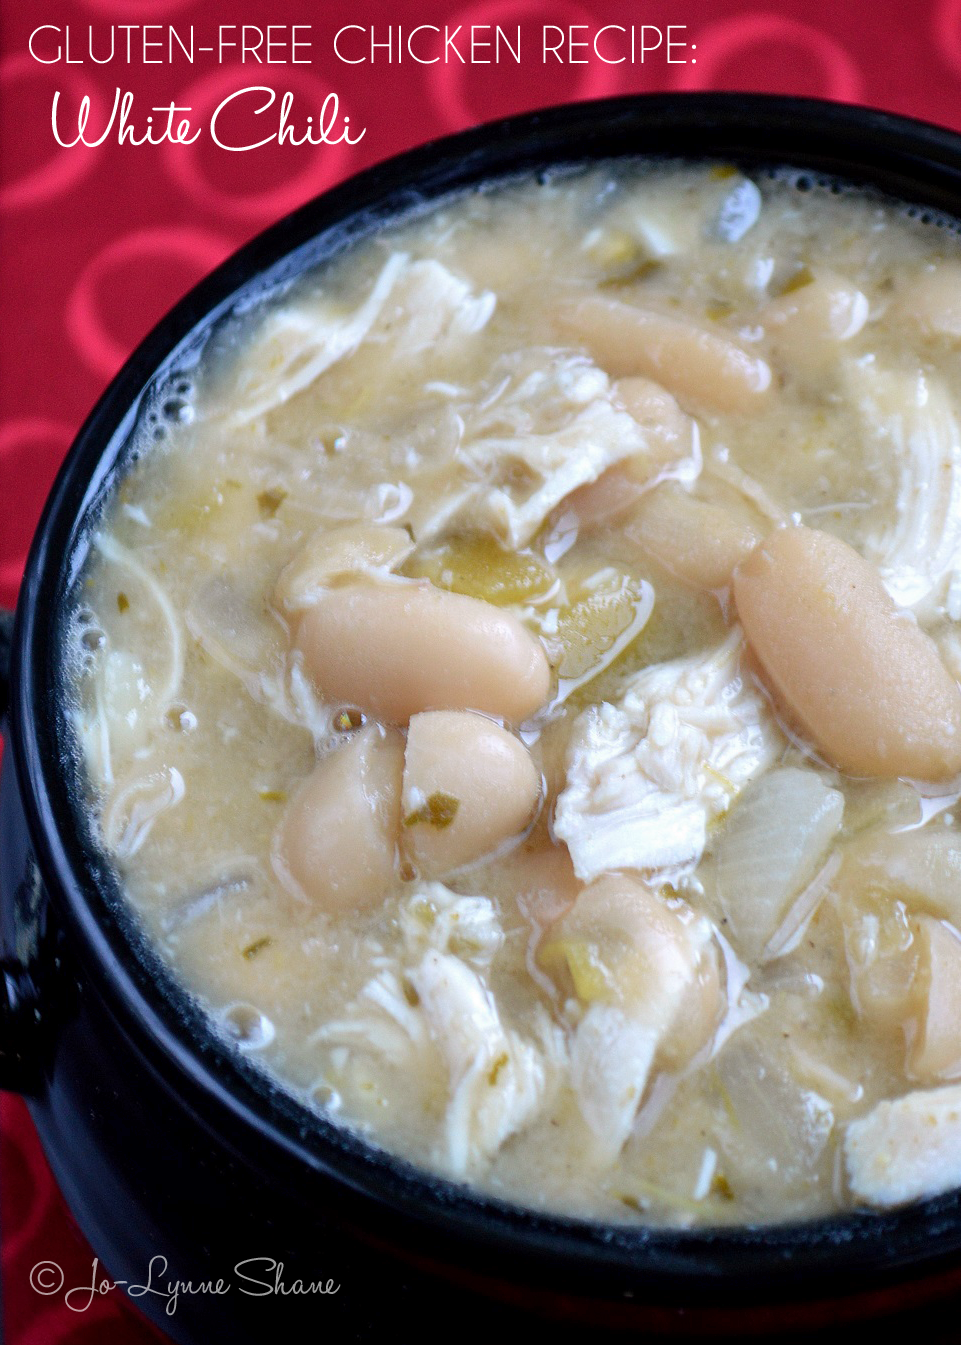 Looking for Gluten-Free Chicken Recipes? Try this White Chili. It is always a hit at our house. 